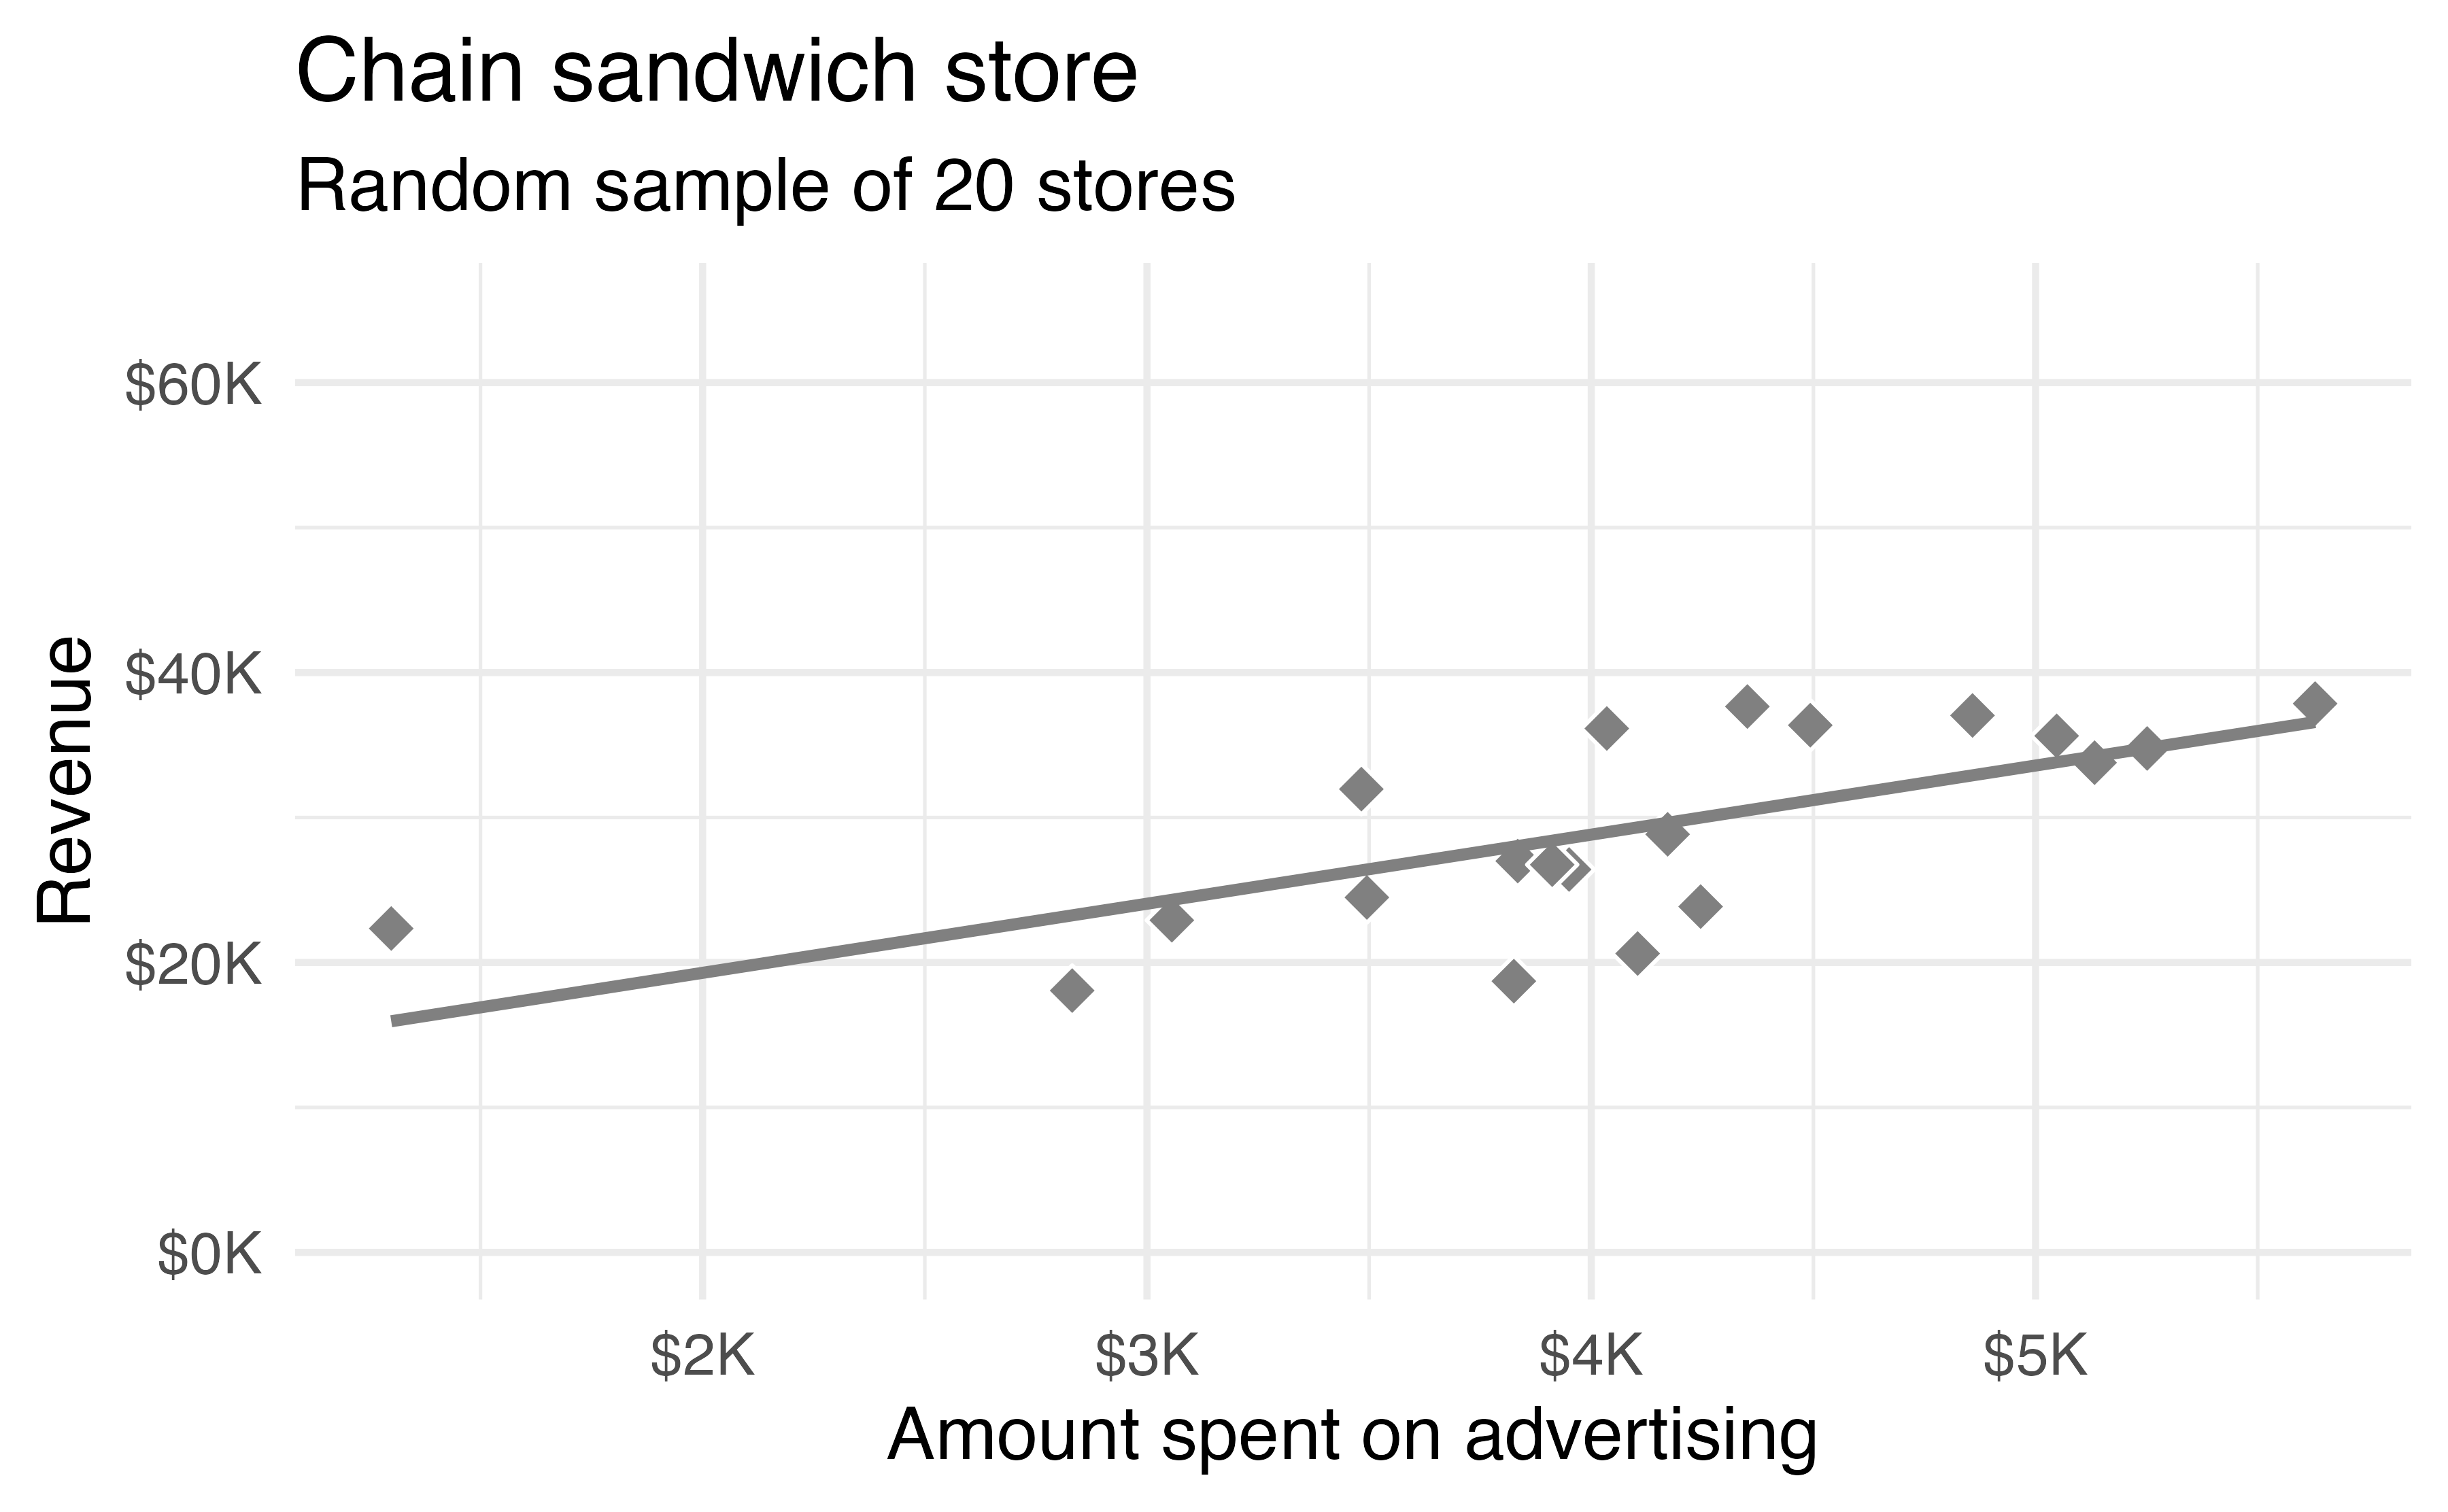 For a random sample of 20 stores, scatterplot with advertising amount on the x-axis and revenue on the y-axis. A linear model is superimposed.  The points show a reasonably strong and positive linear trend.